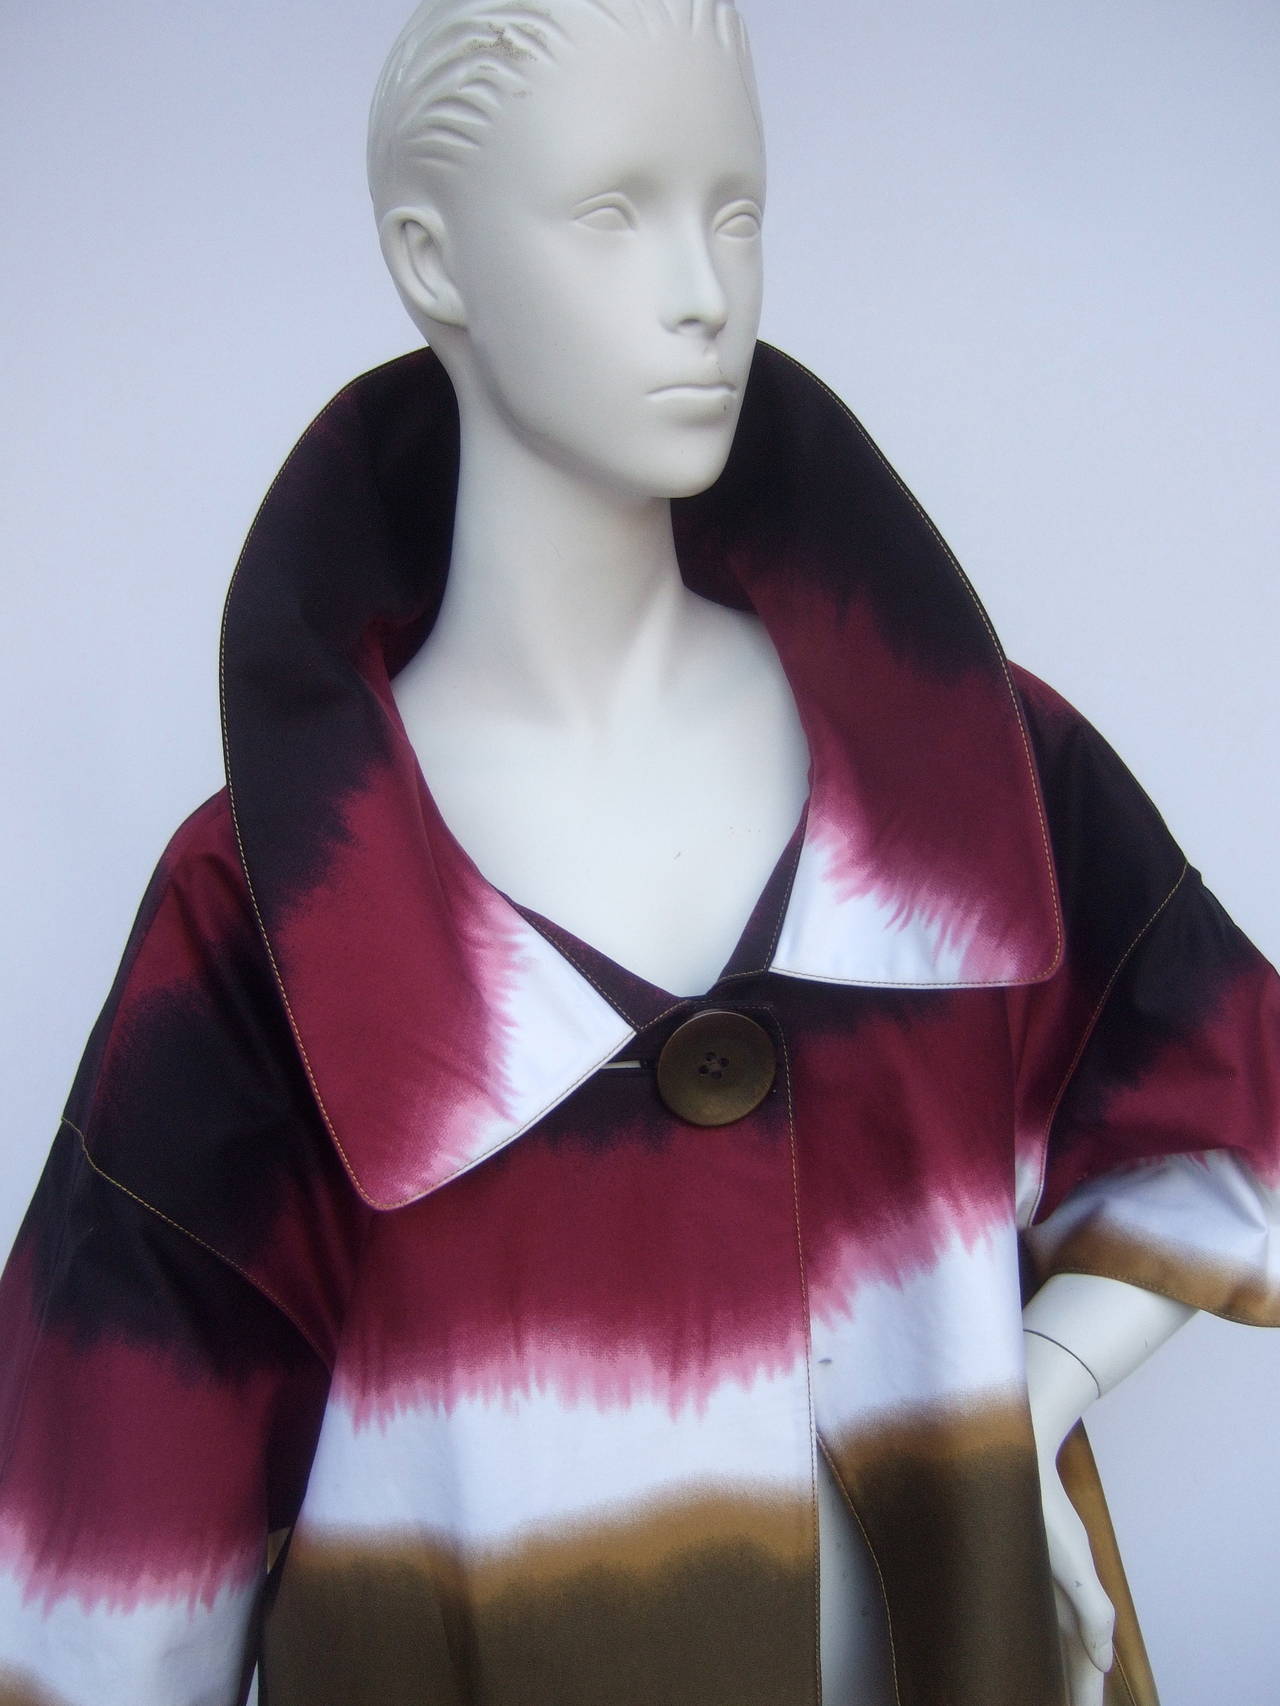 Mod cotton print tie dyed duster coat designed by Ellen Tracy Size Large
The unique high fashion cotton 3/4 length coat has a color blocked tie dye design combined with berry & white that transitions into earth tone colors
The coat is designed